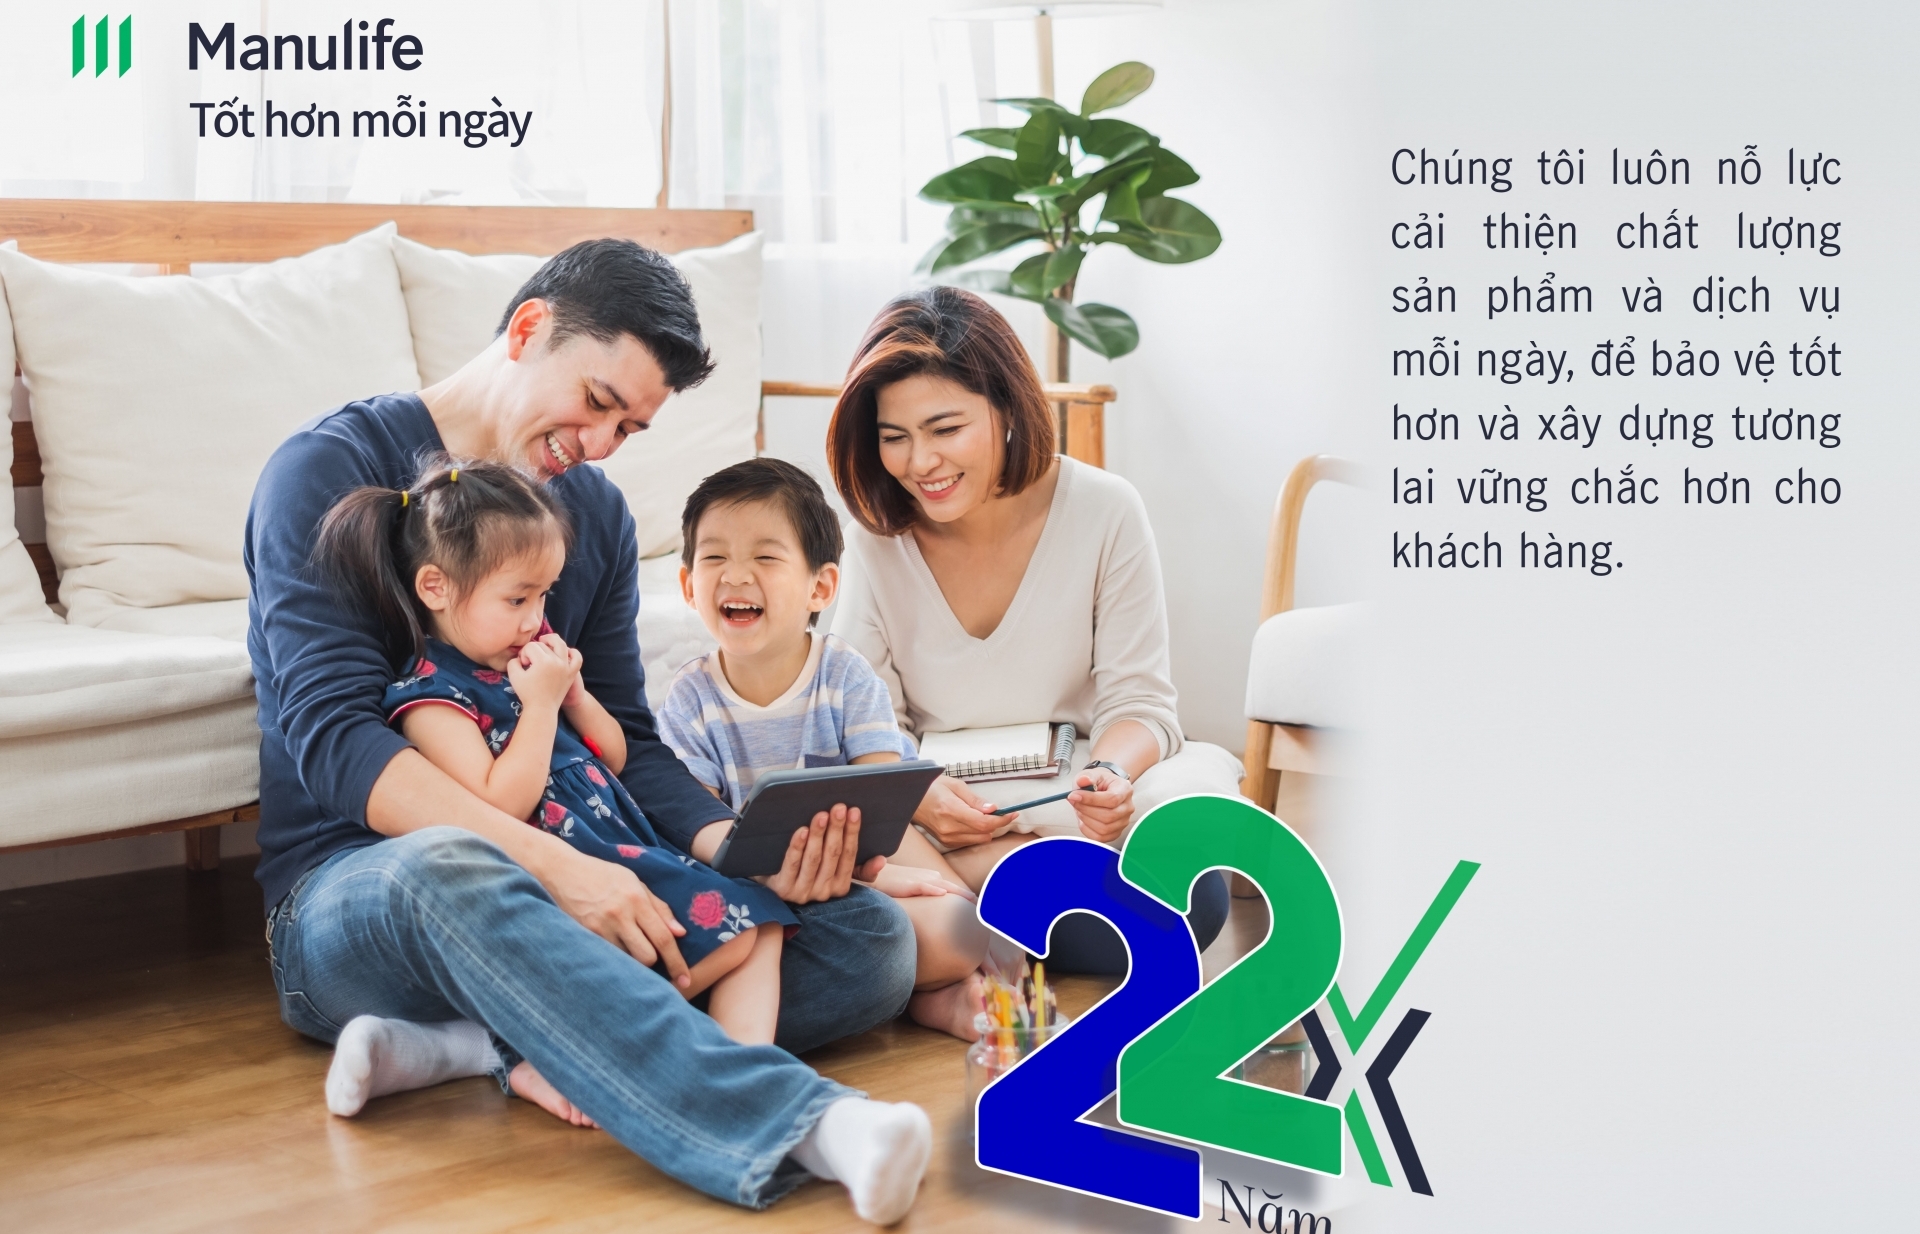 Manulife Vietnam reaffirms "Every day better" commitment as part of 22nd anniversary